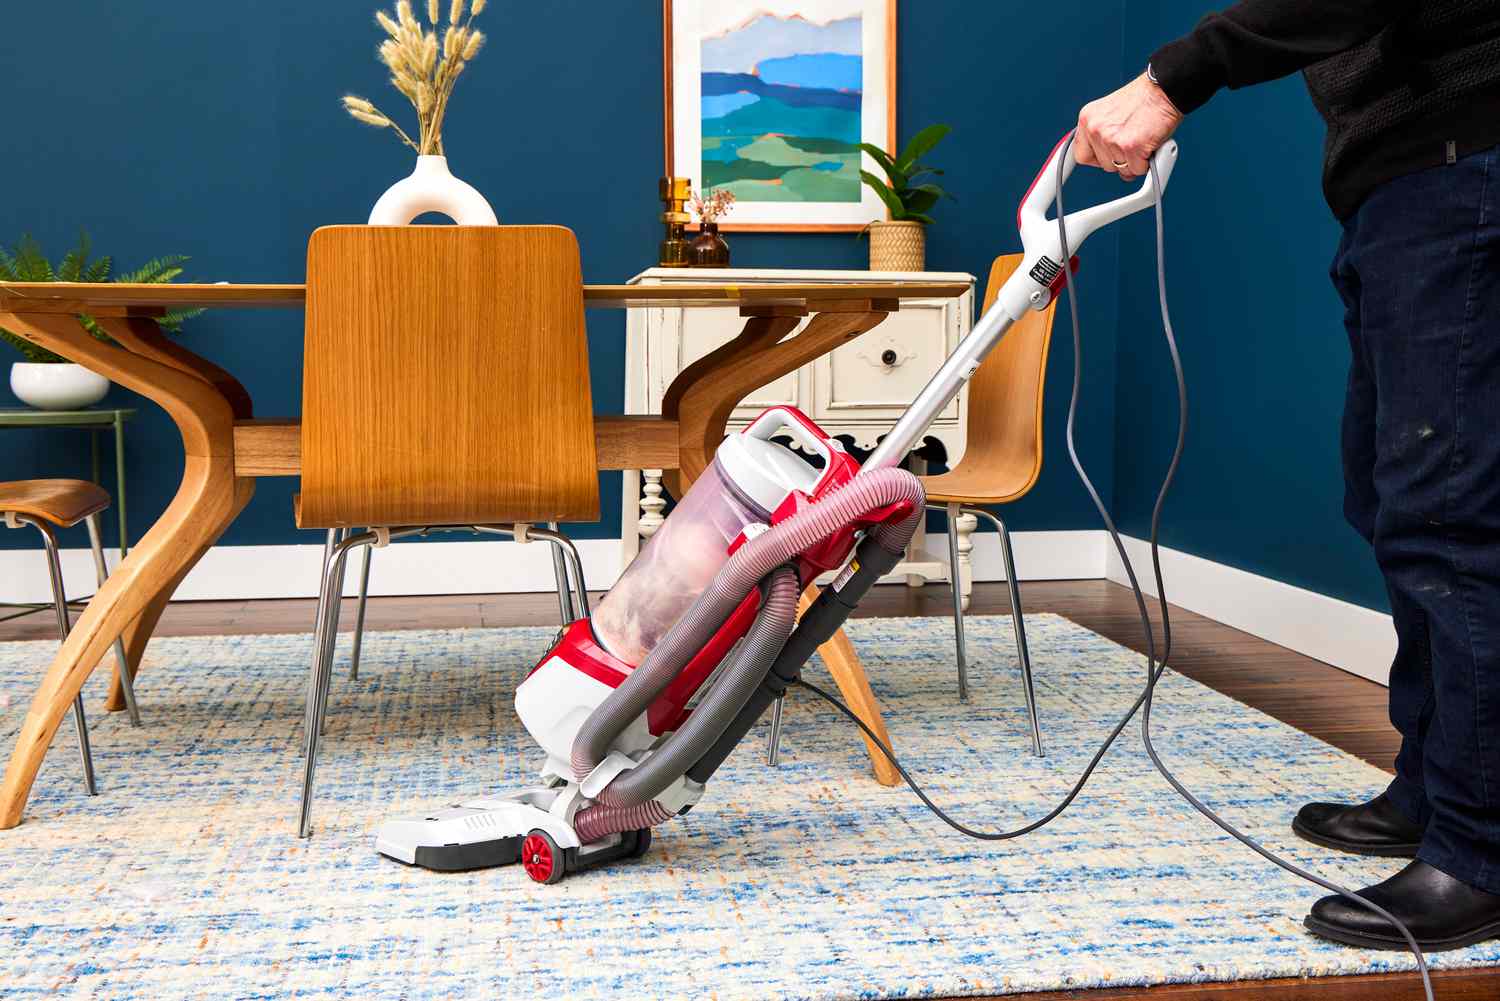 A person vacuums under a table and chairs using the Kenmore Allergen Seal Bagless Upright Vacuum